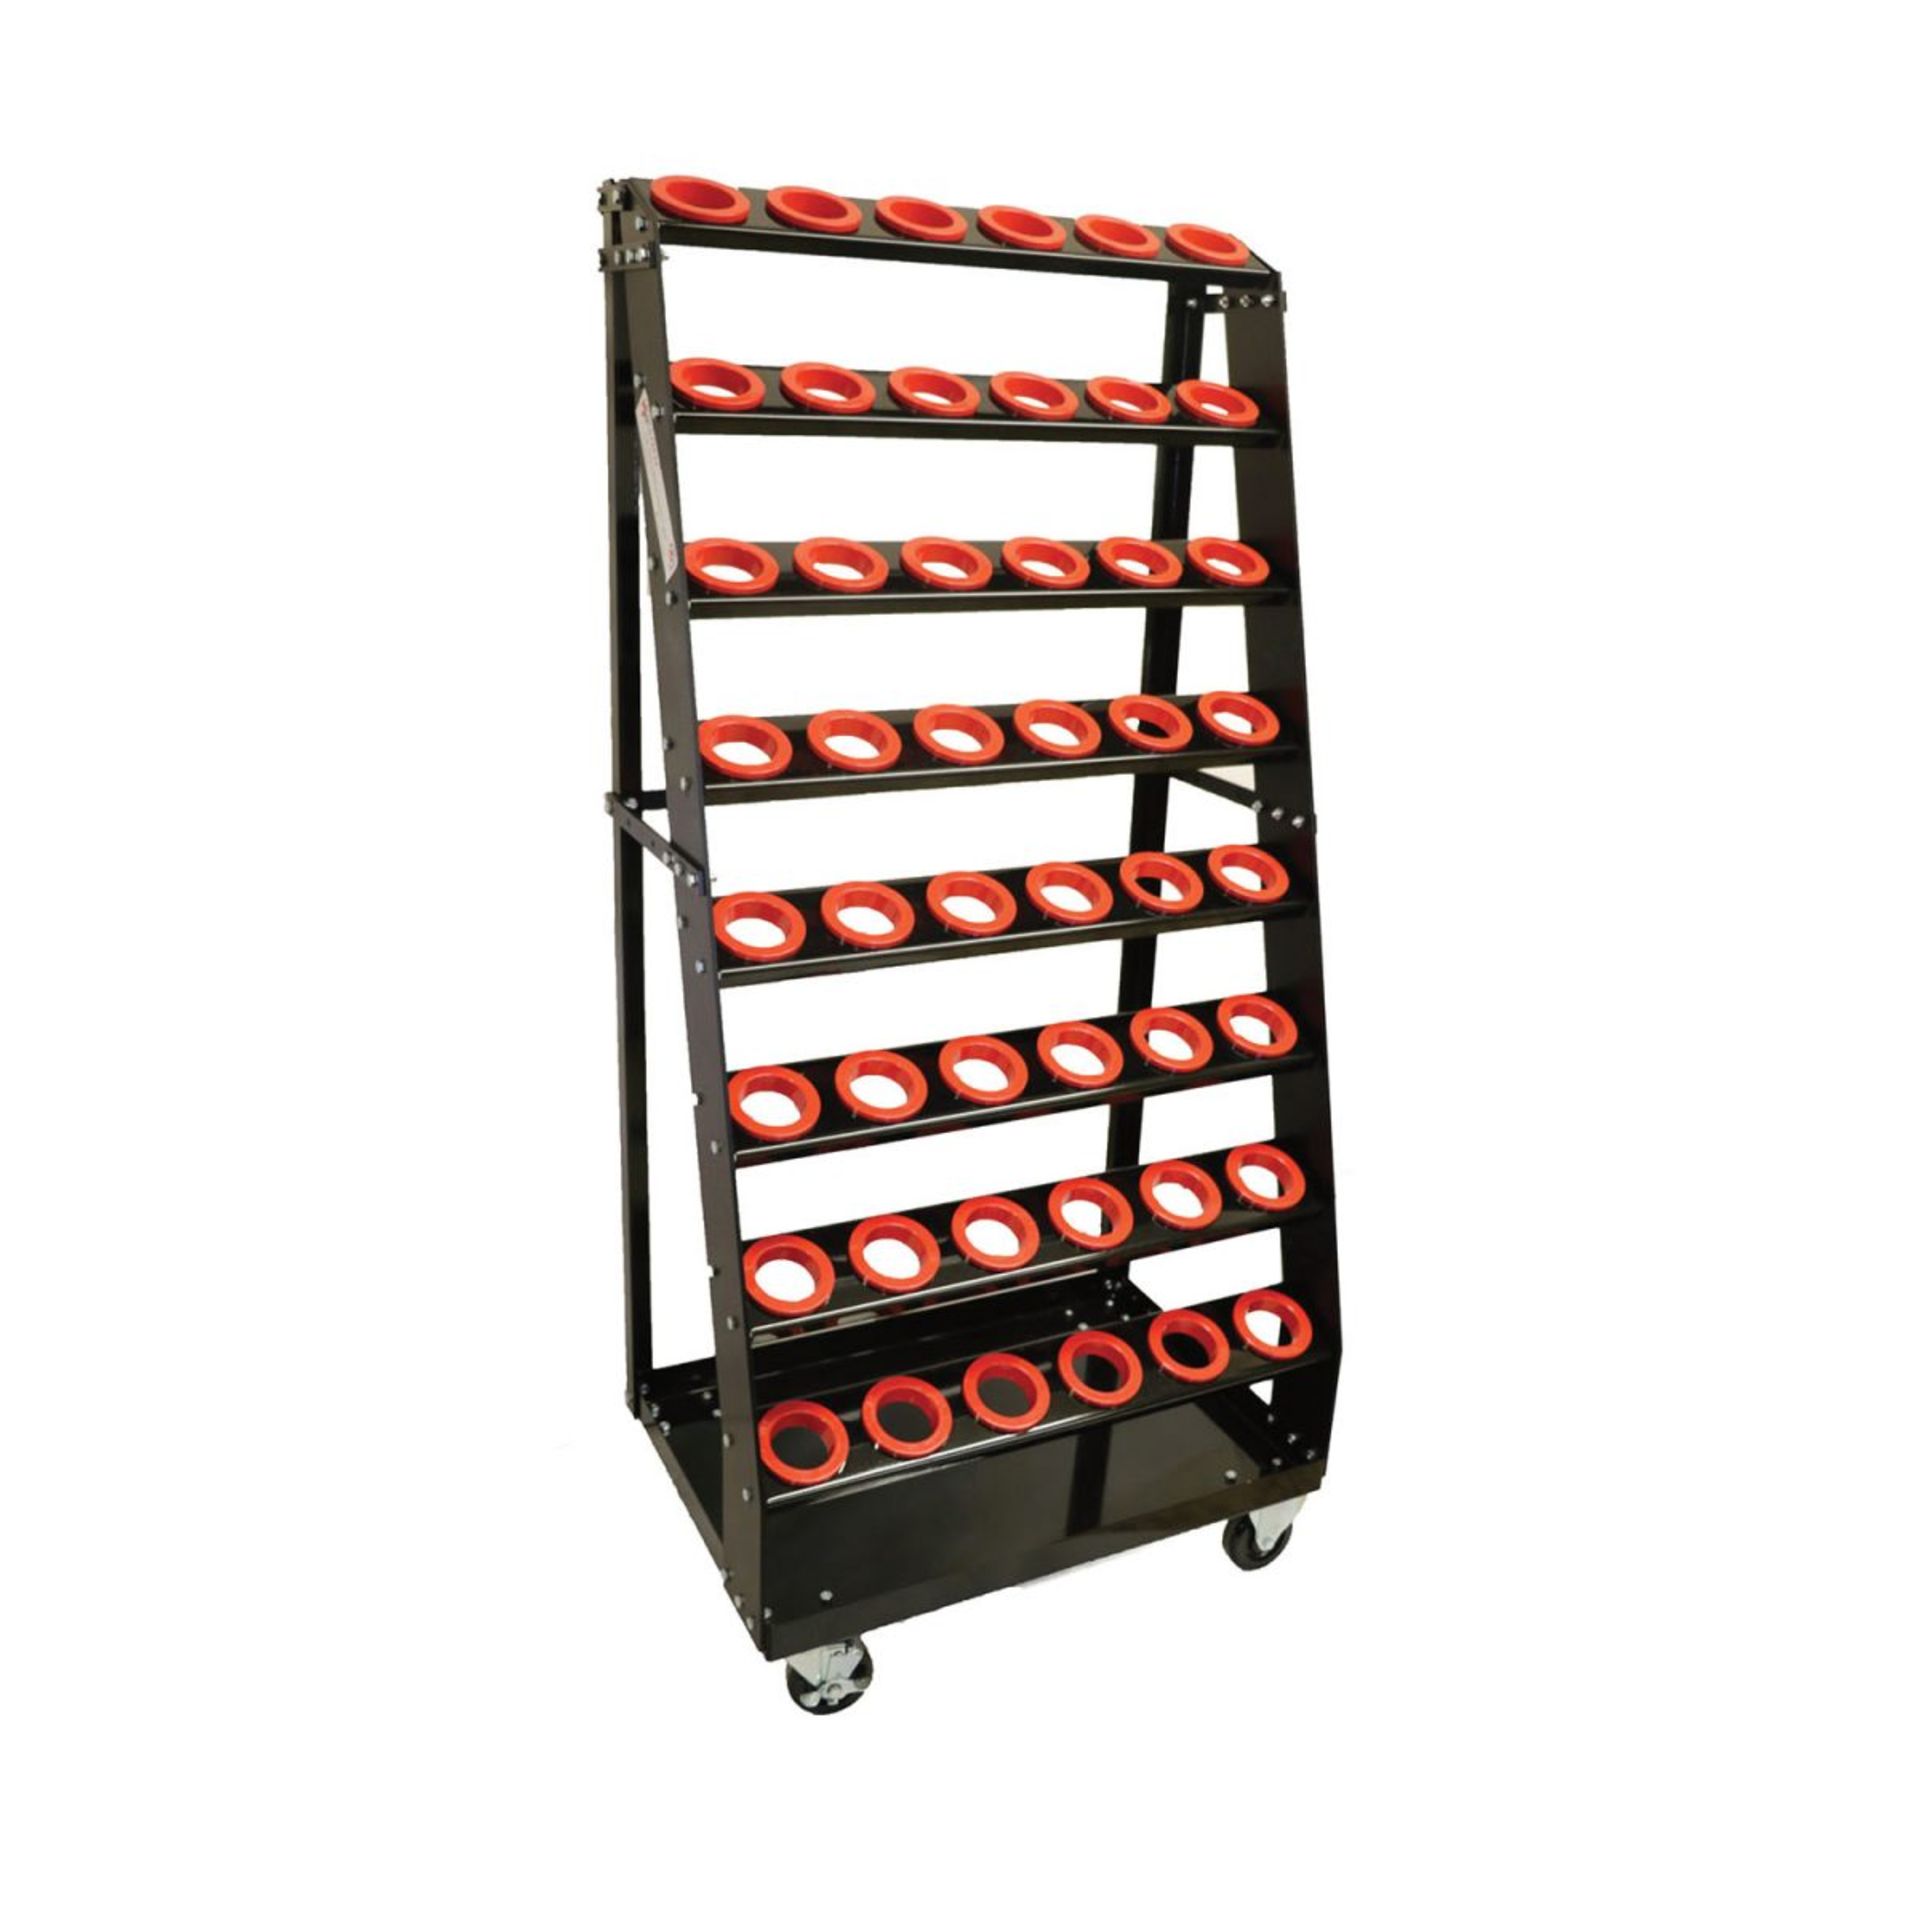 CAT 40 , CNC Tool cart, Ladder model, 48 Holders capacity, Brand new, Assembled and ready to use